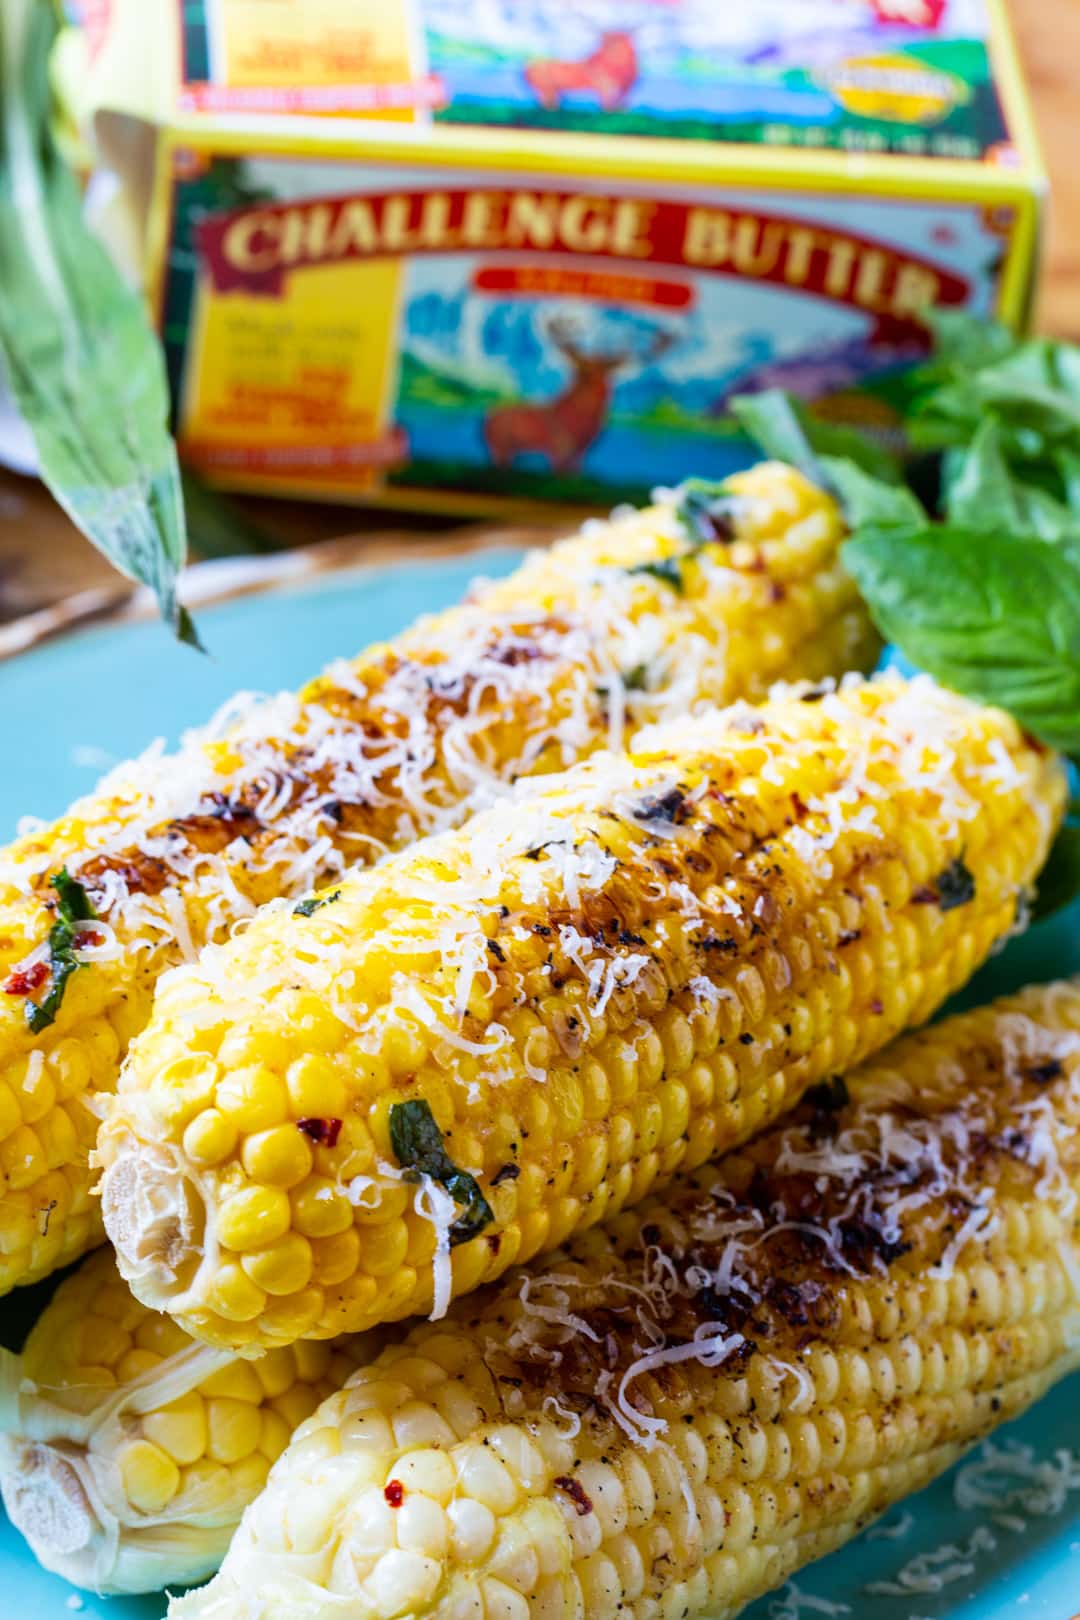 Grilled corn and box of Challenge Butter.